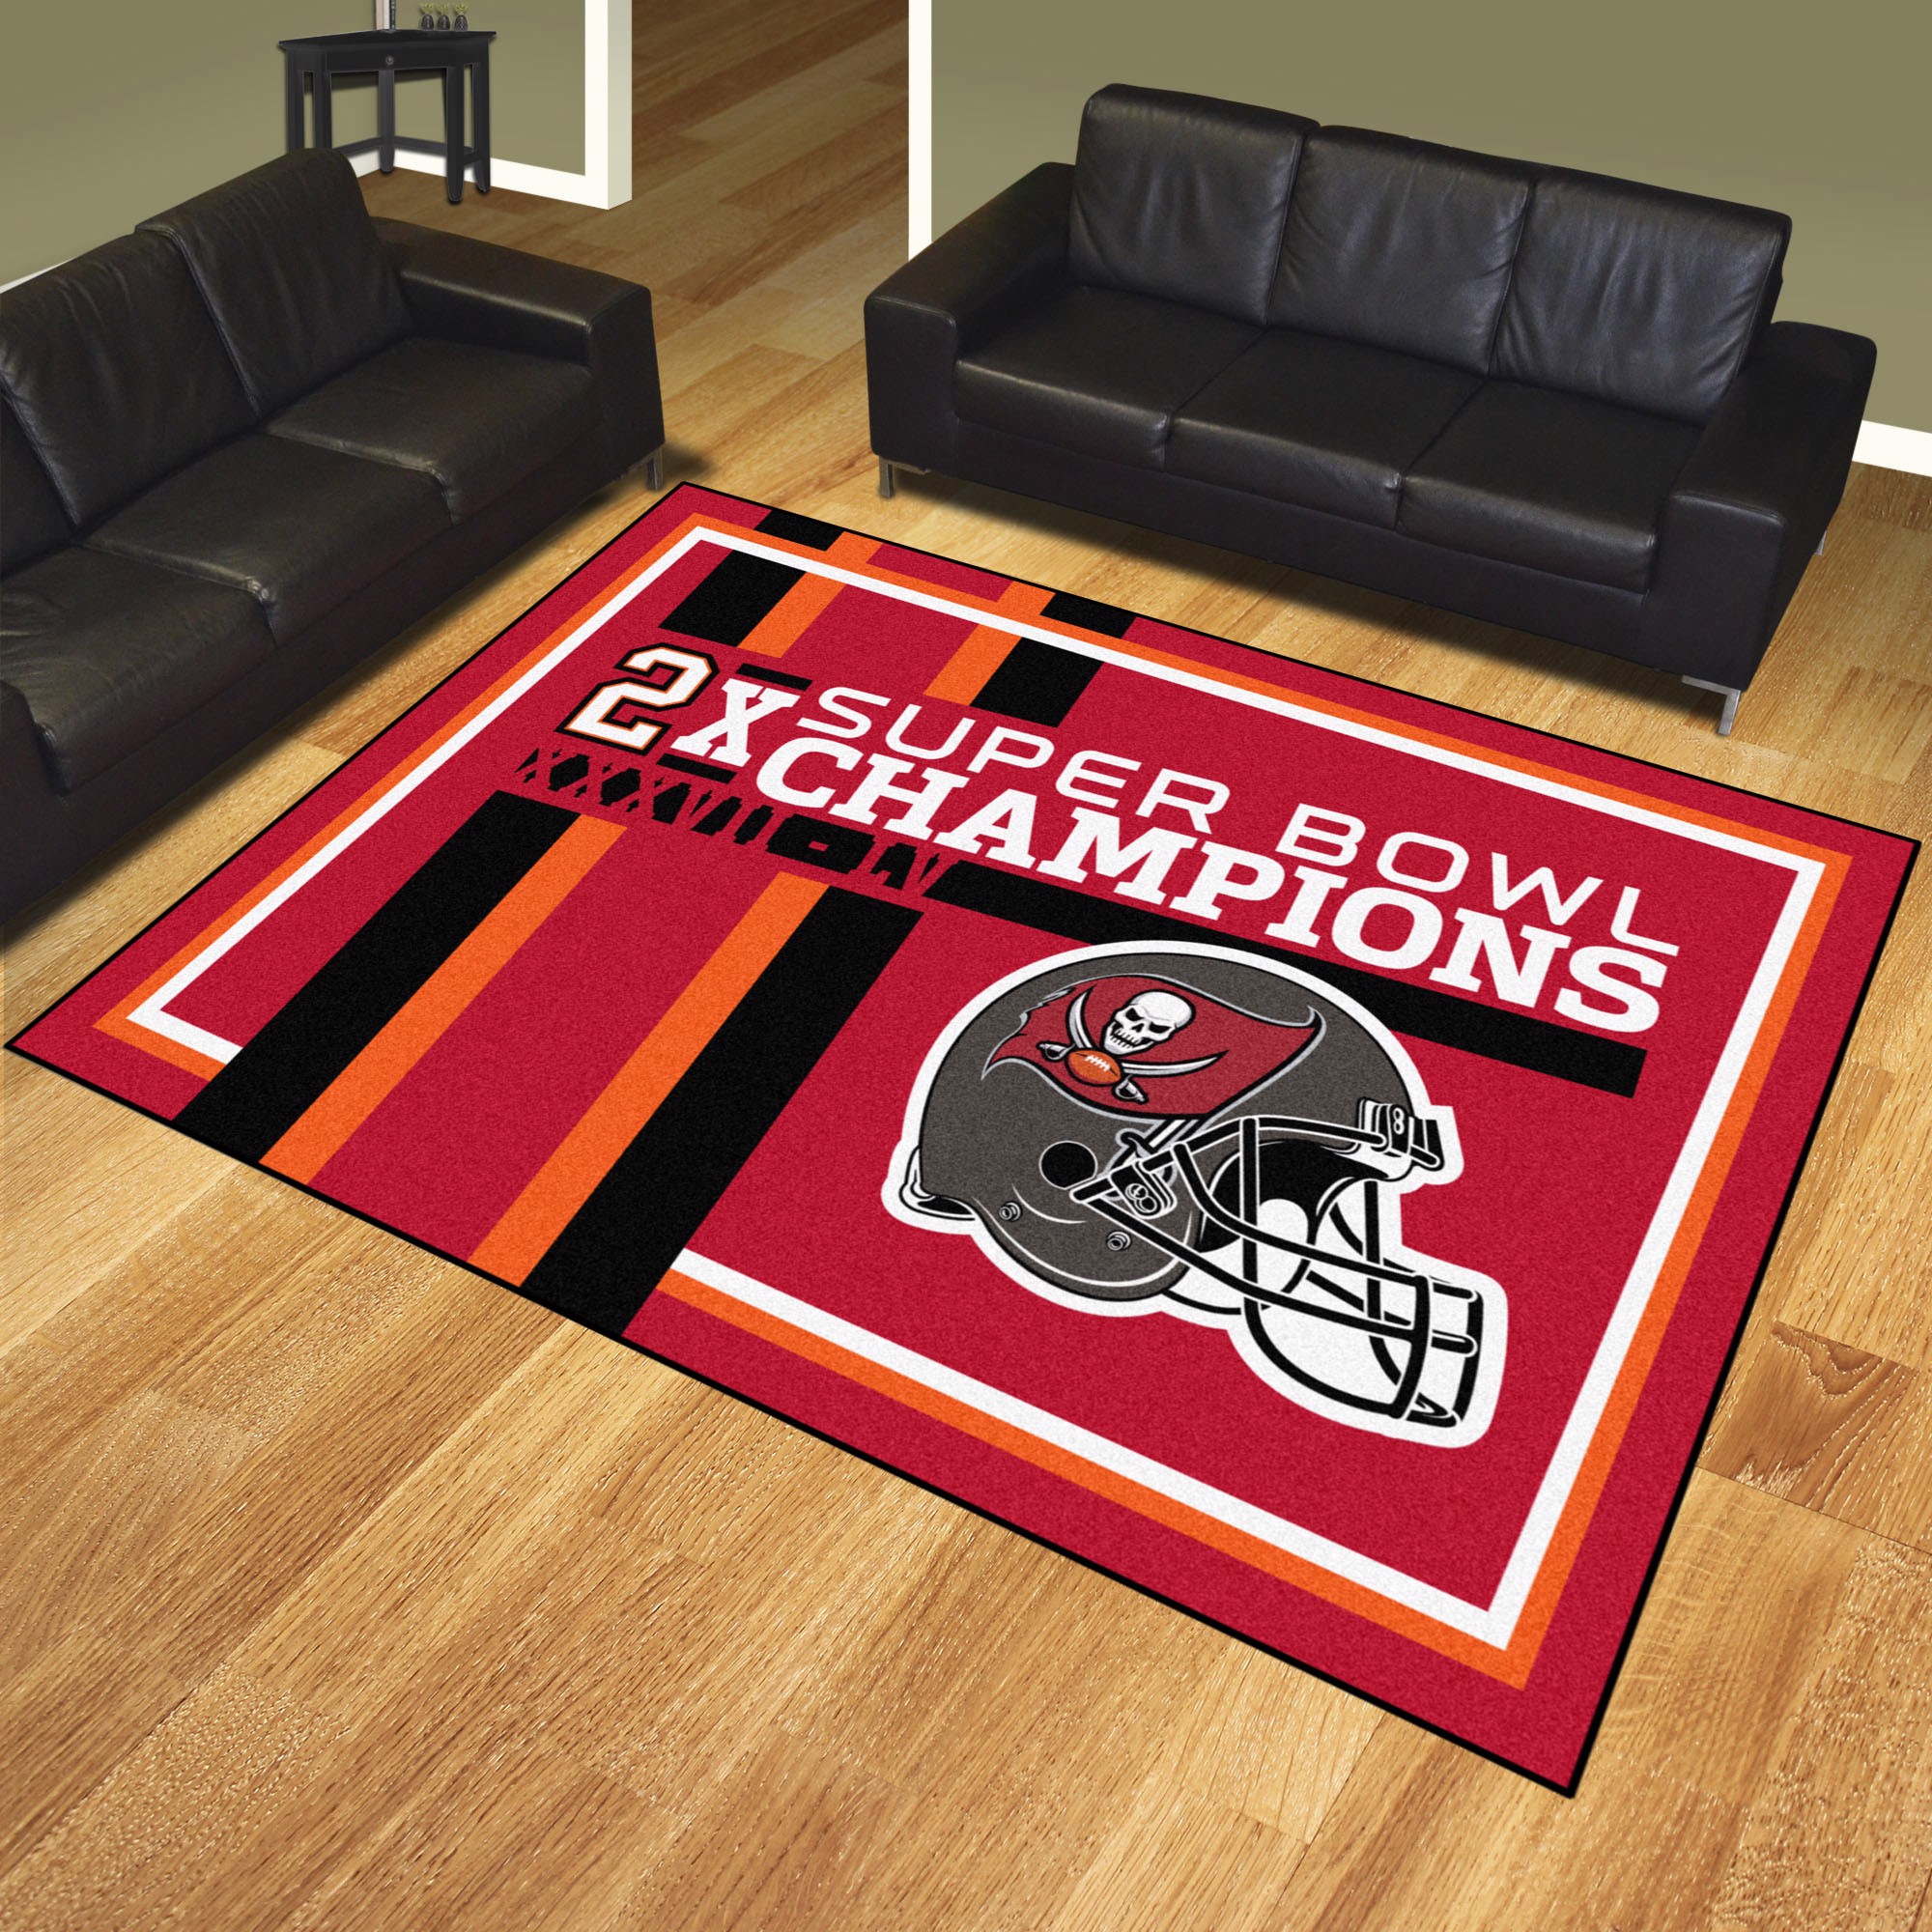 Nfl Tampa Bay Buccaneers Super Bowl, Rugs Of The World Tampa